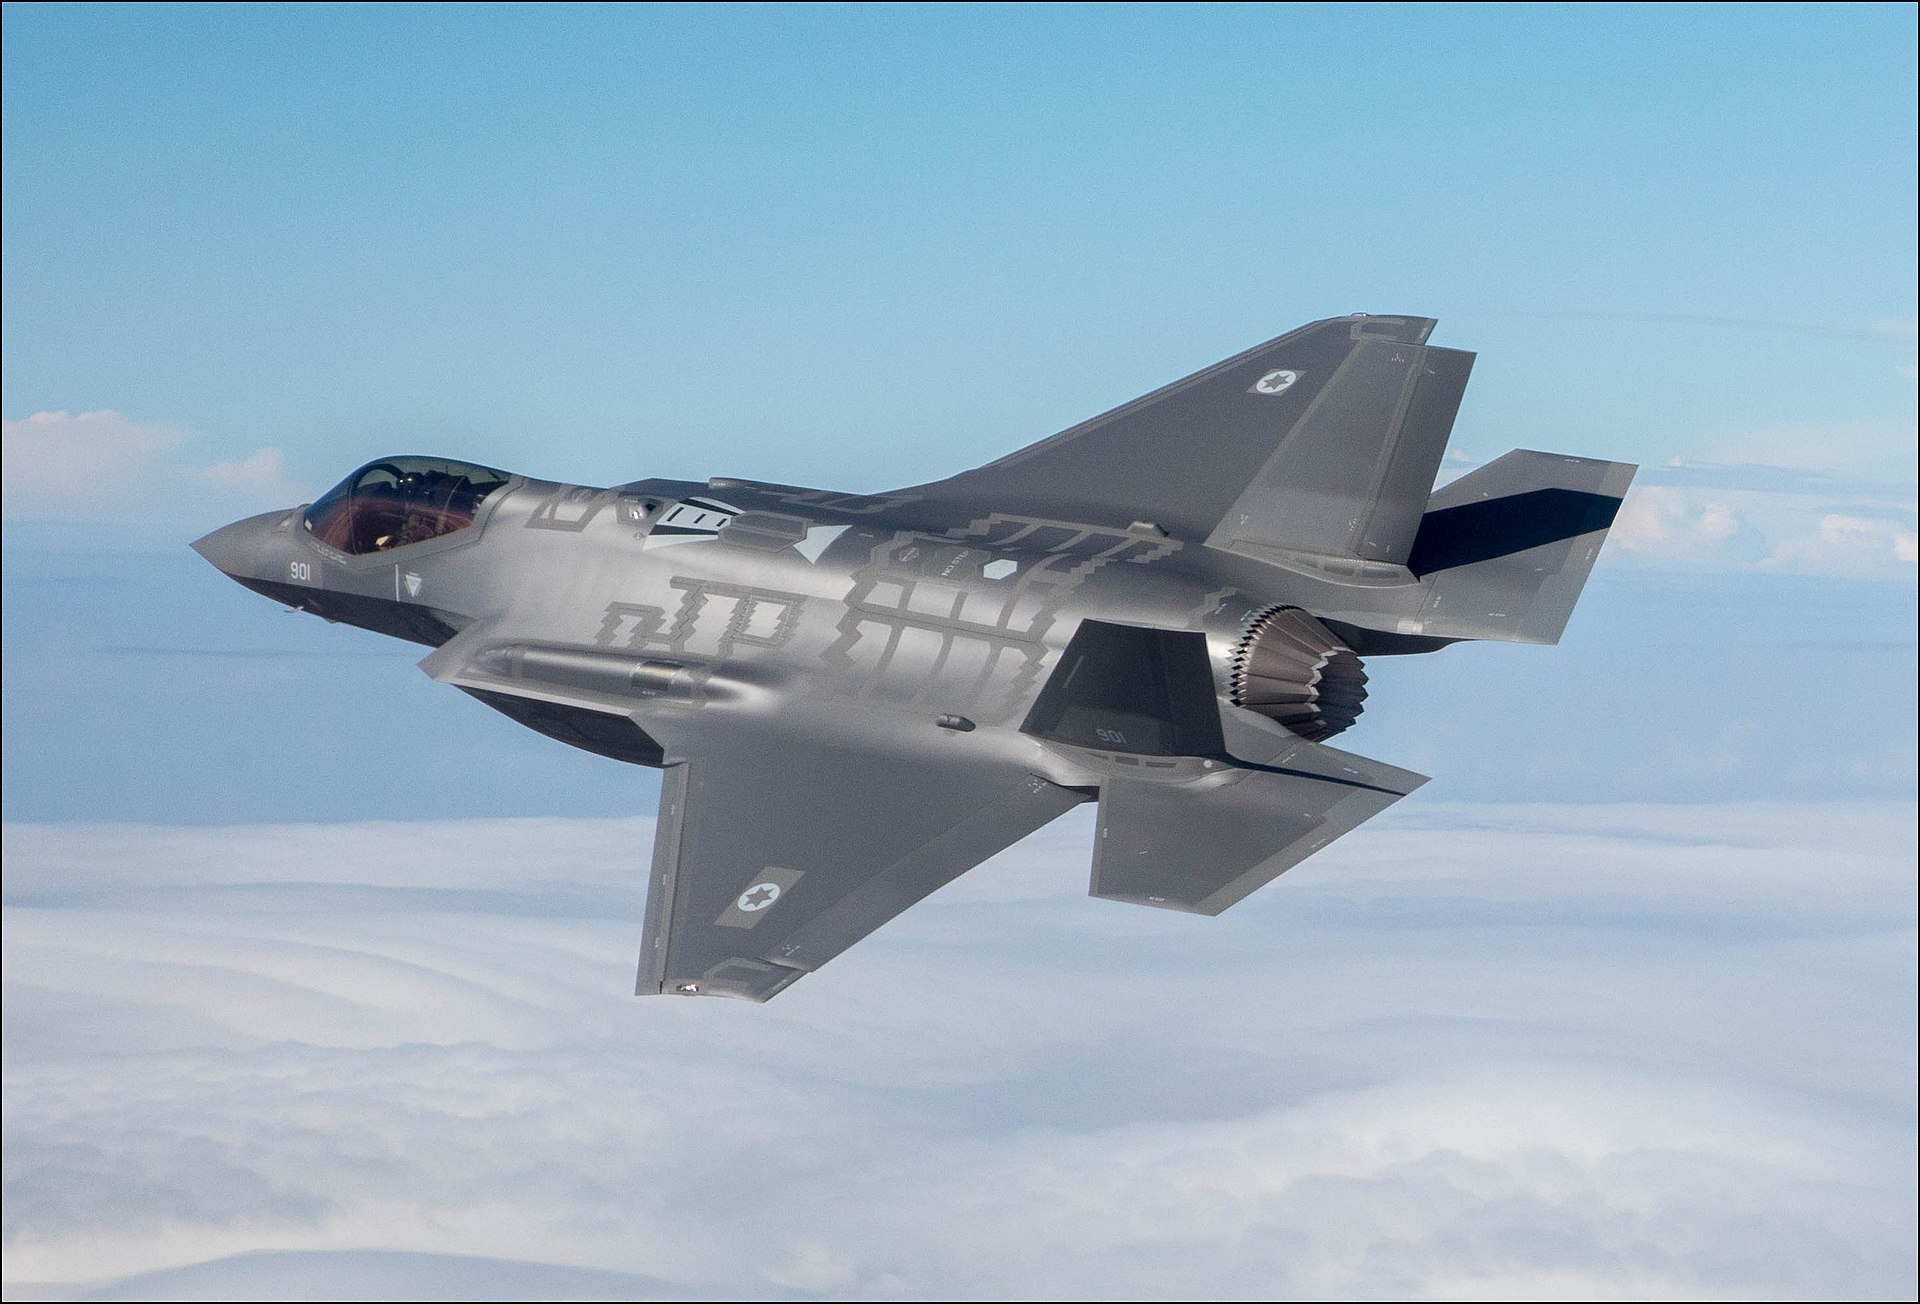         Boeings F-35A Stealth Fighter
BOEING has offererd INDIA the futuristic JSF-F35; that is 5th Generation & under development !!!